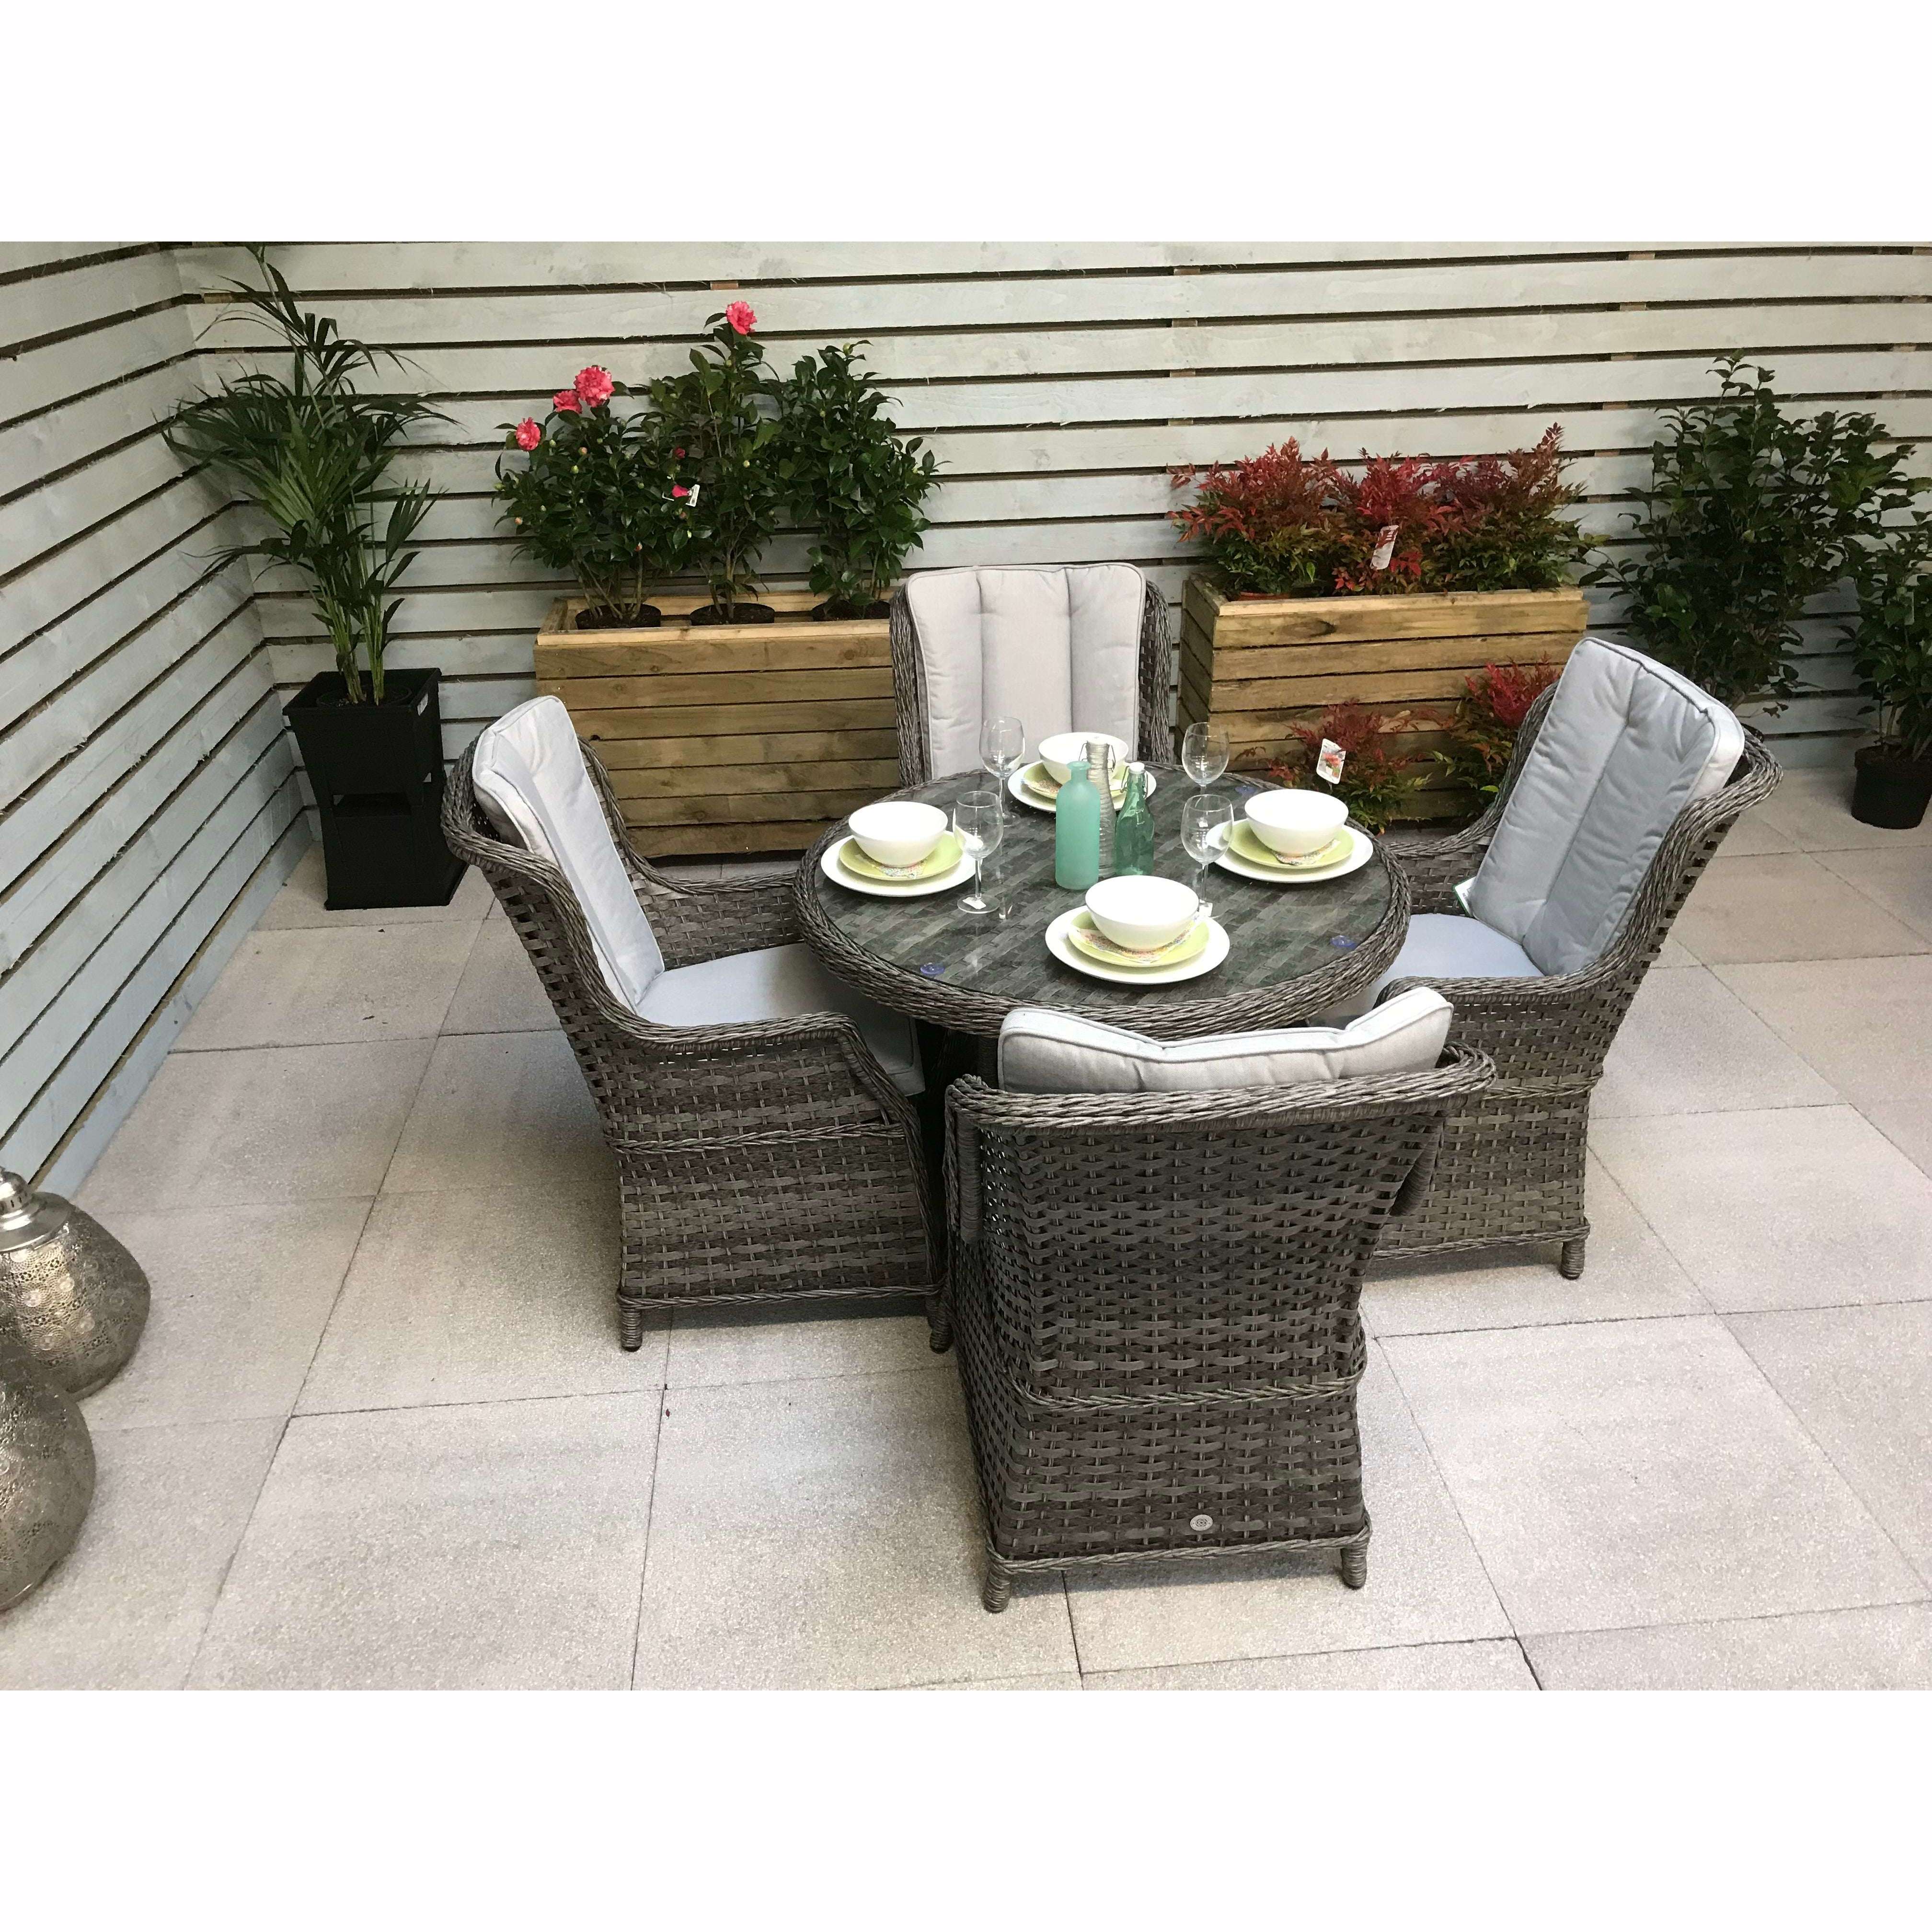 Exceptional Garden:Signature Weave Victoria Round Dining Table